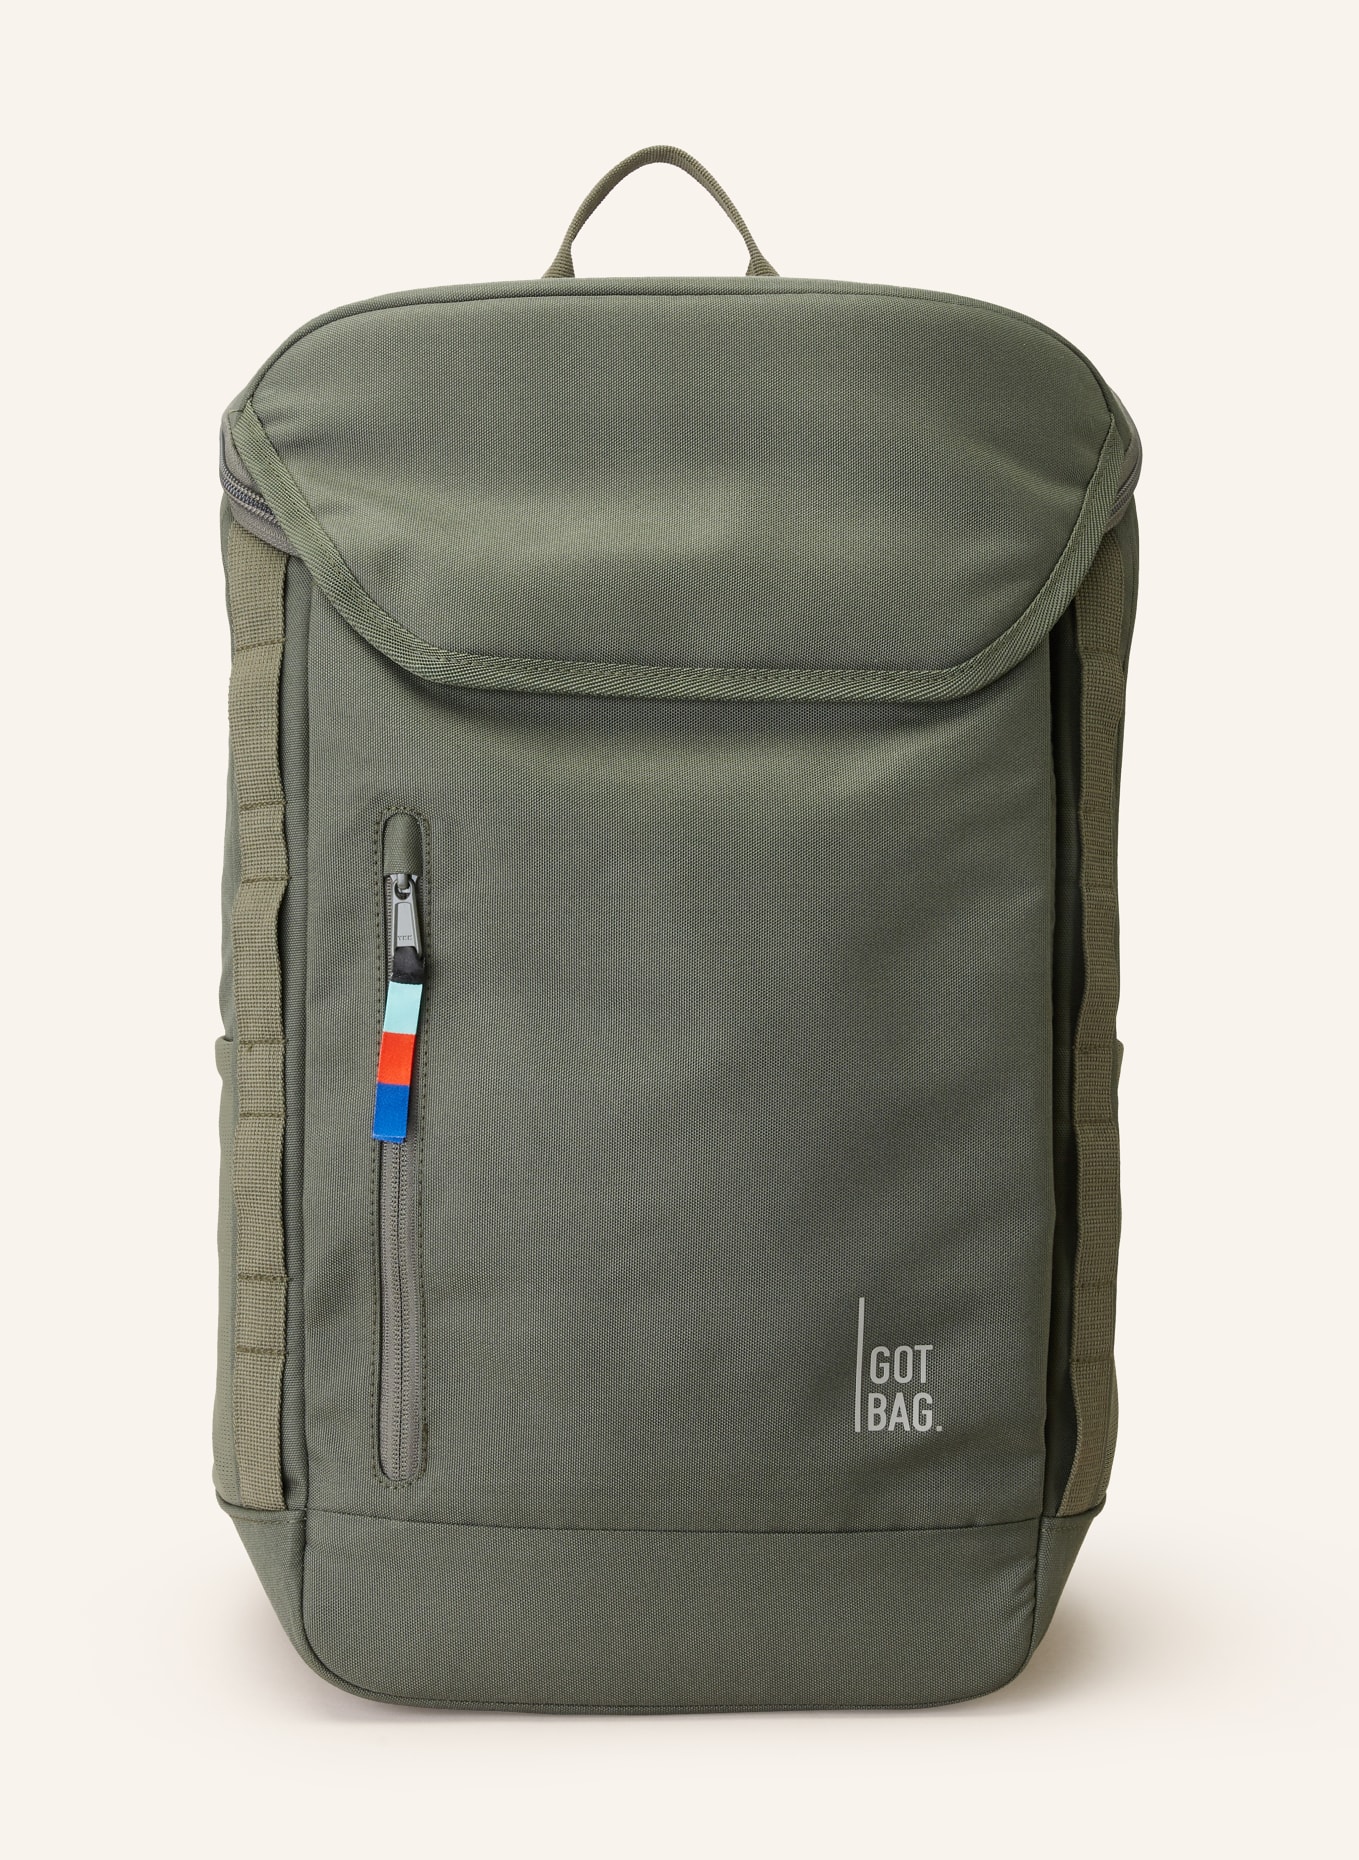 GOT BAG Backpack PRO PACK with laptop compartment, Color: KHAKI (Image 1)